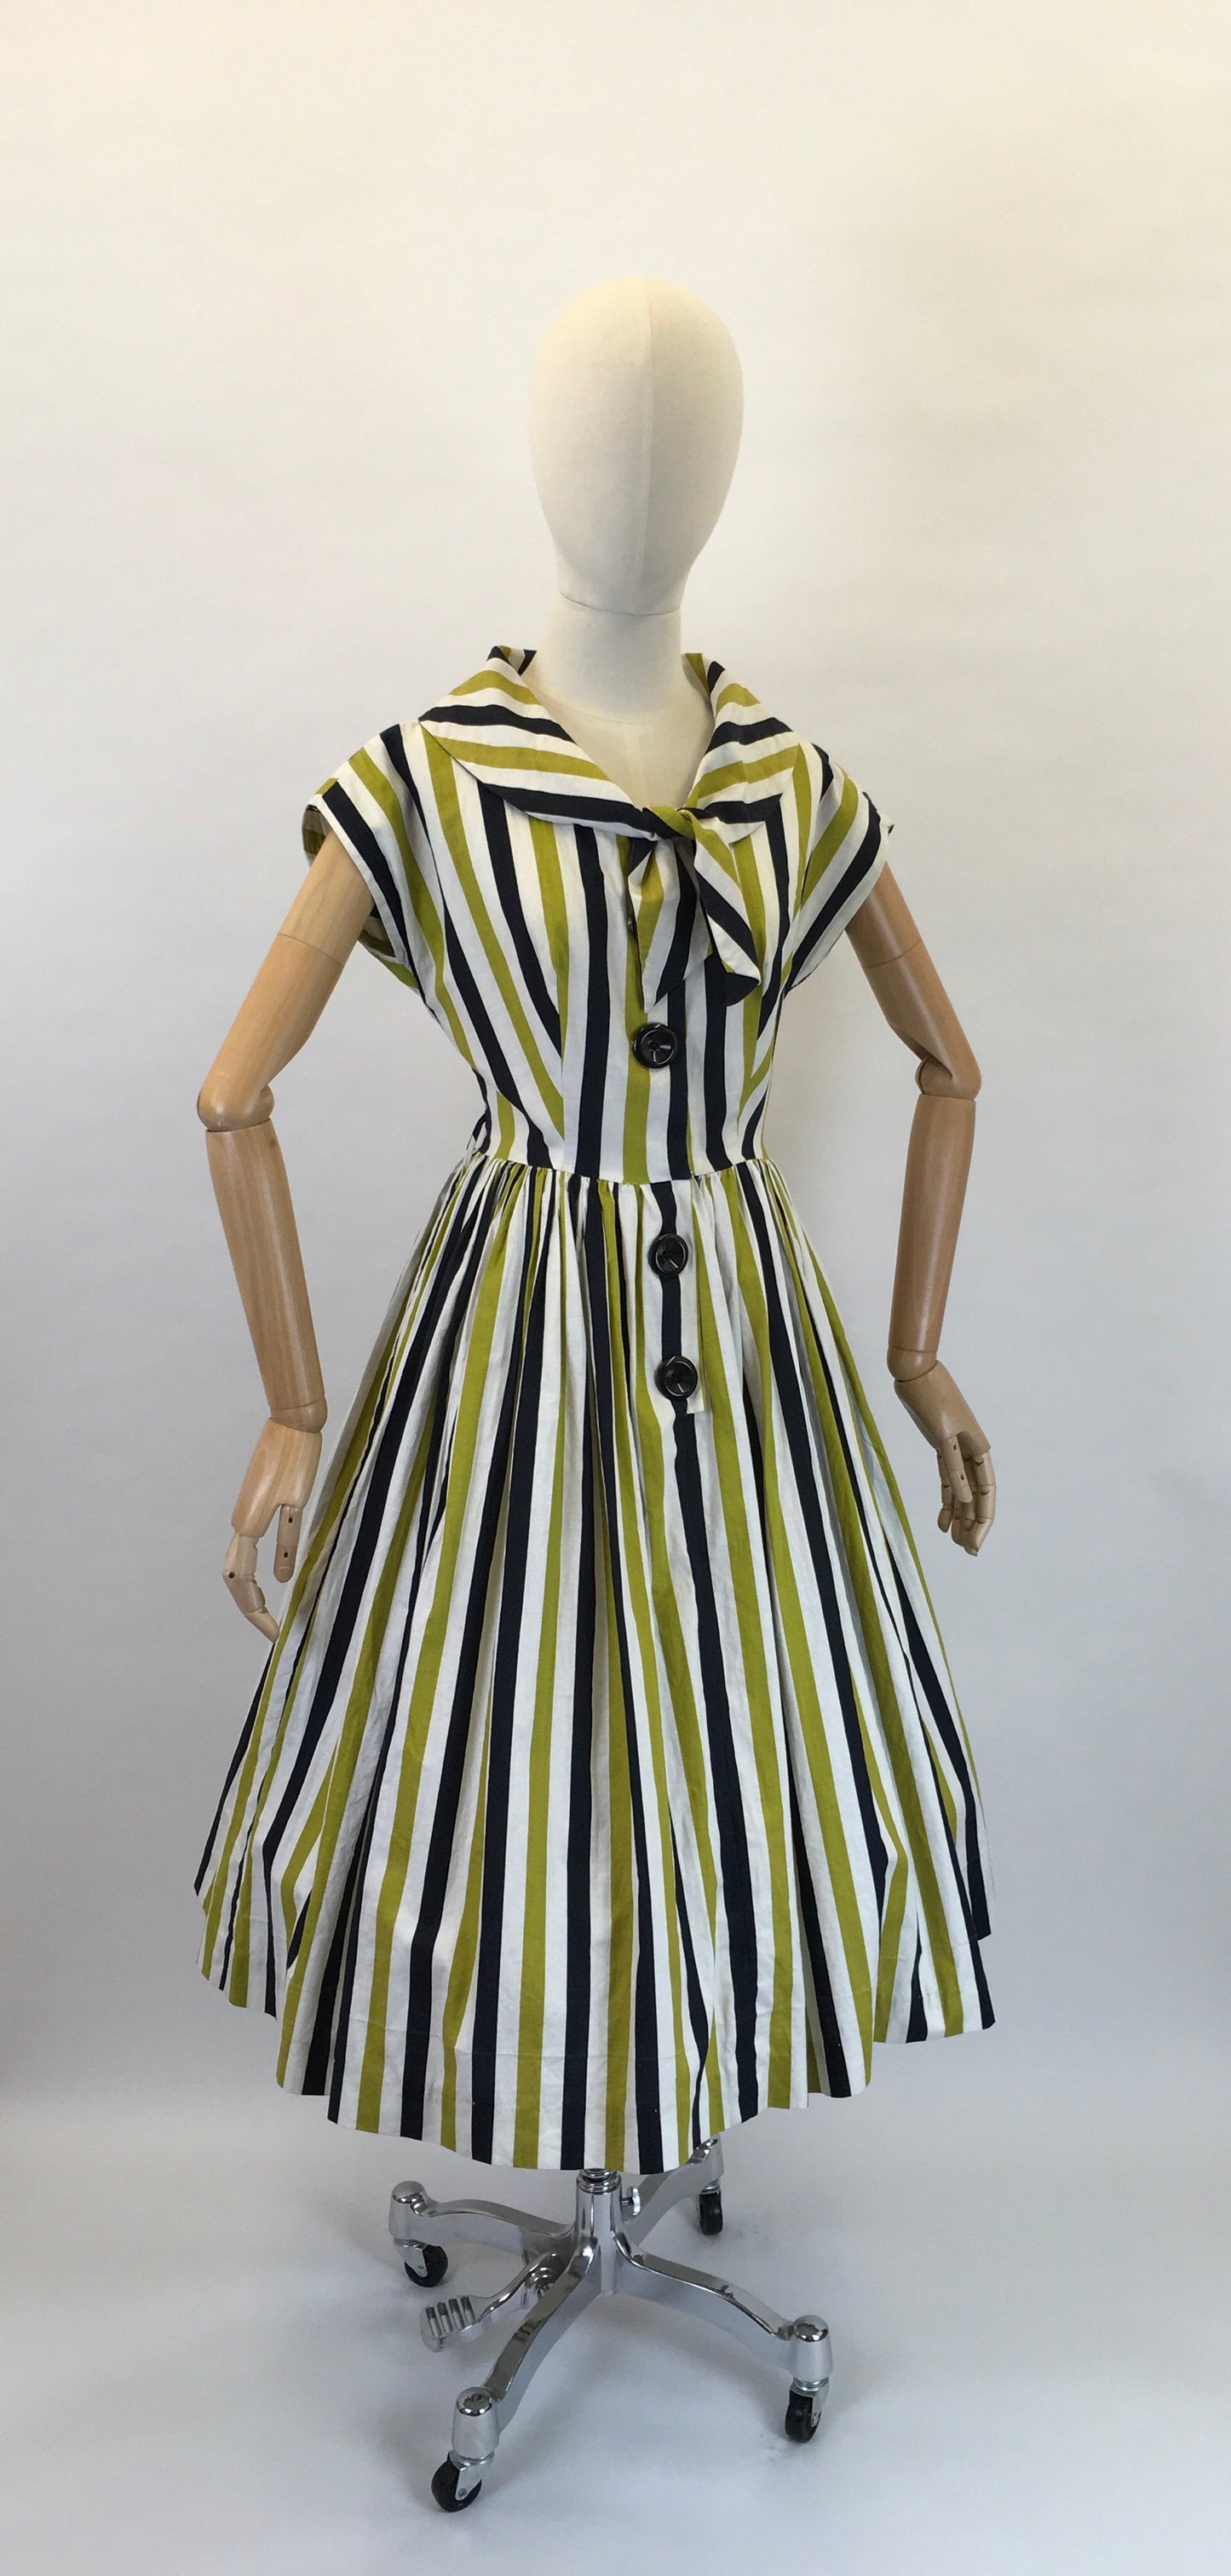 Original 1950s Fun Day Dress - Made From a Lovely Black, White and Chartreuse Stripe Cotton